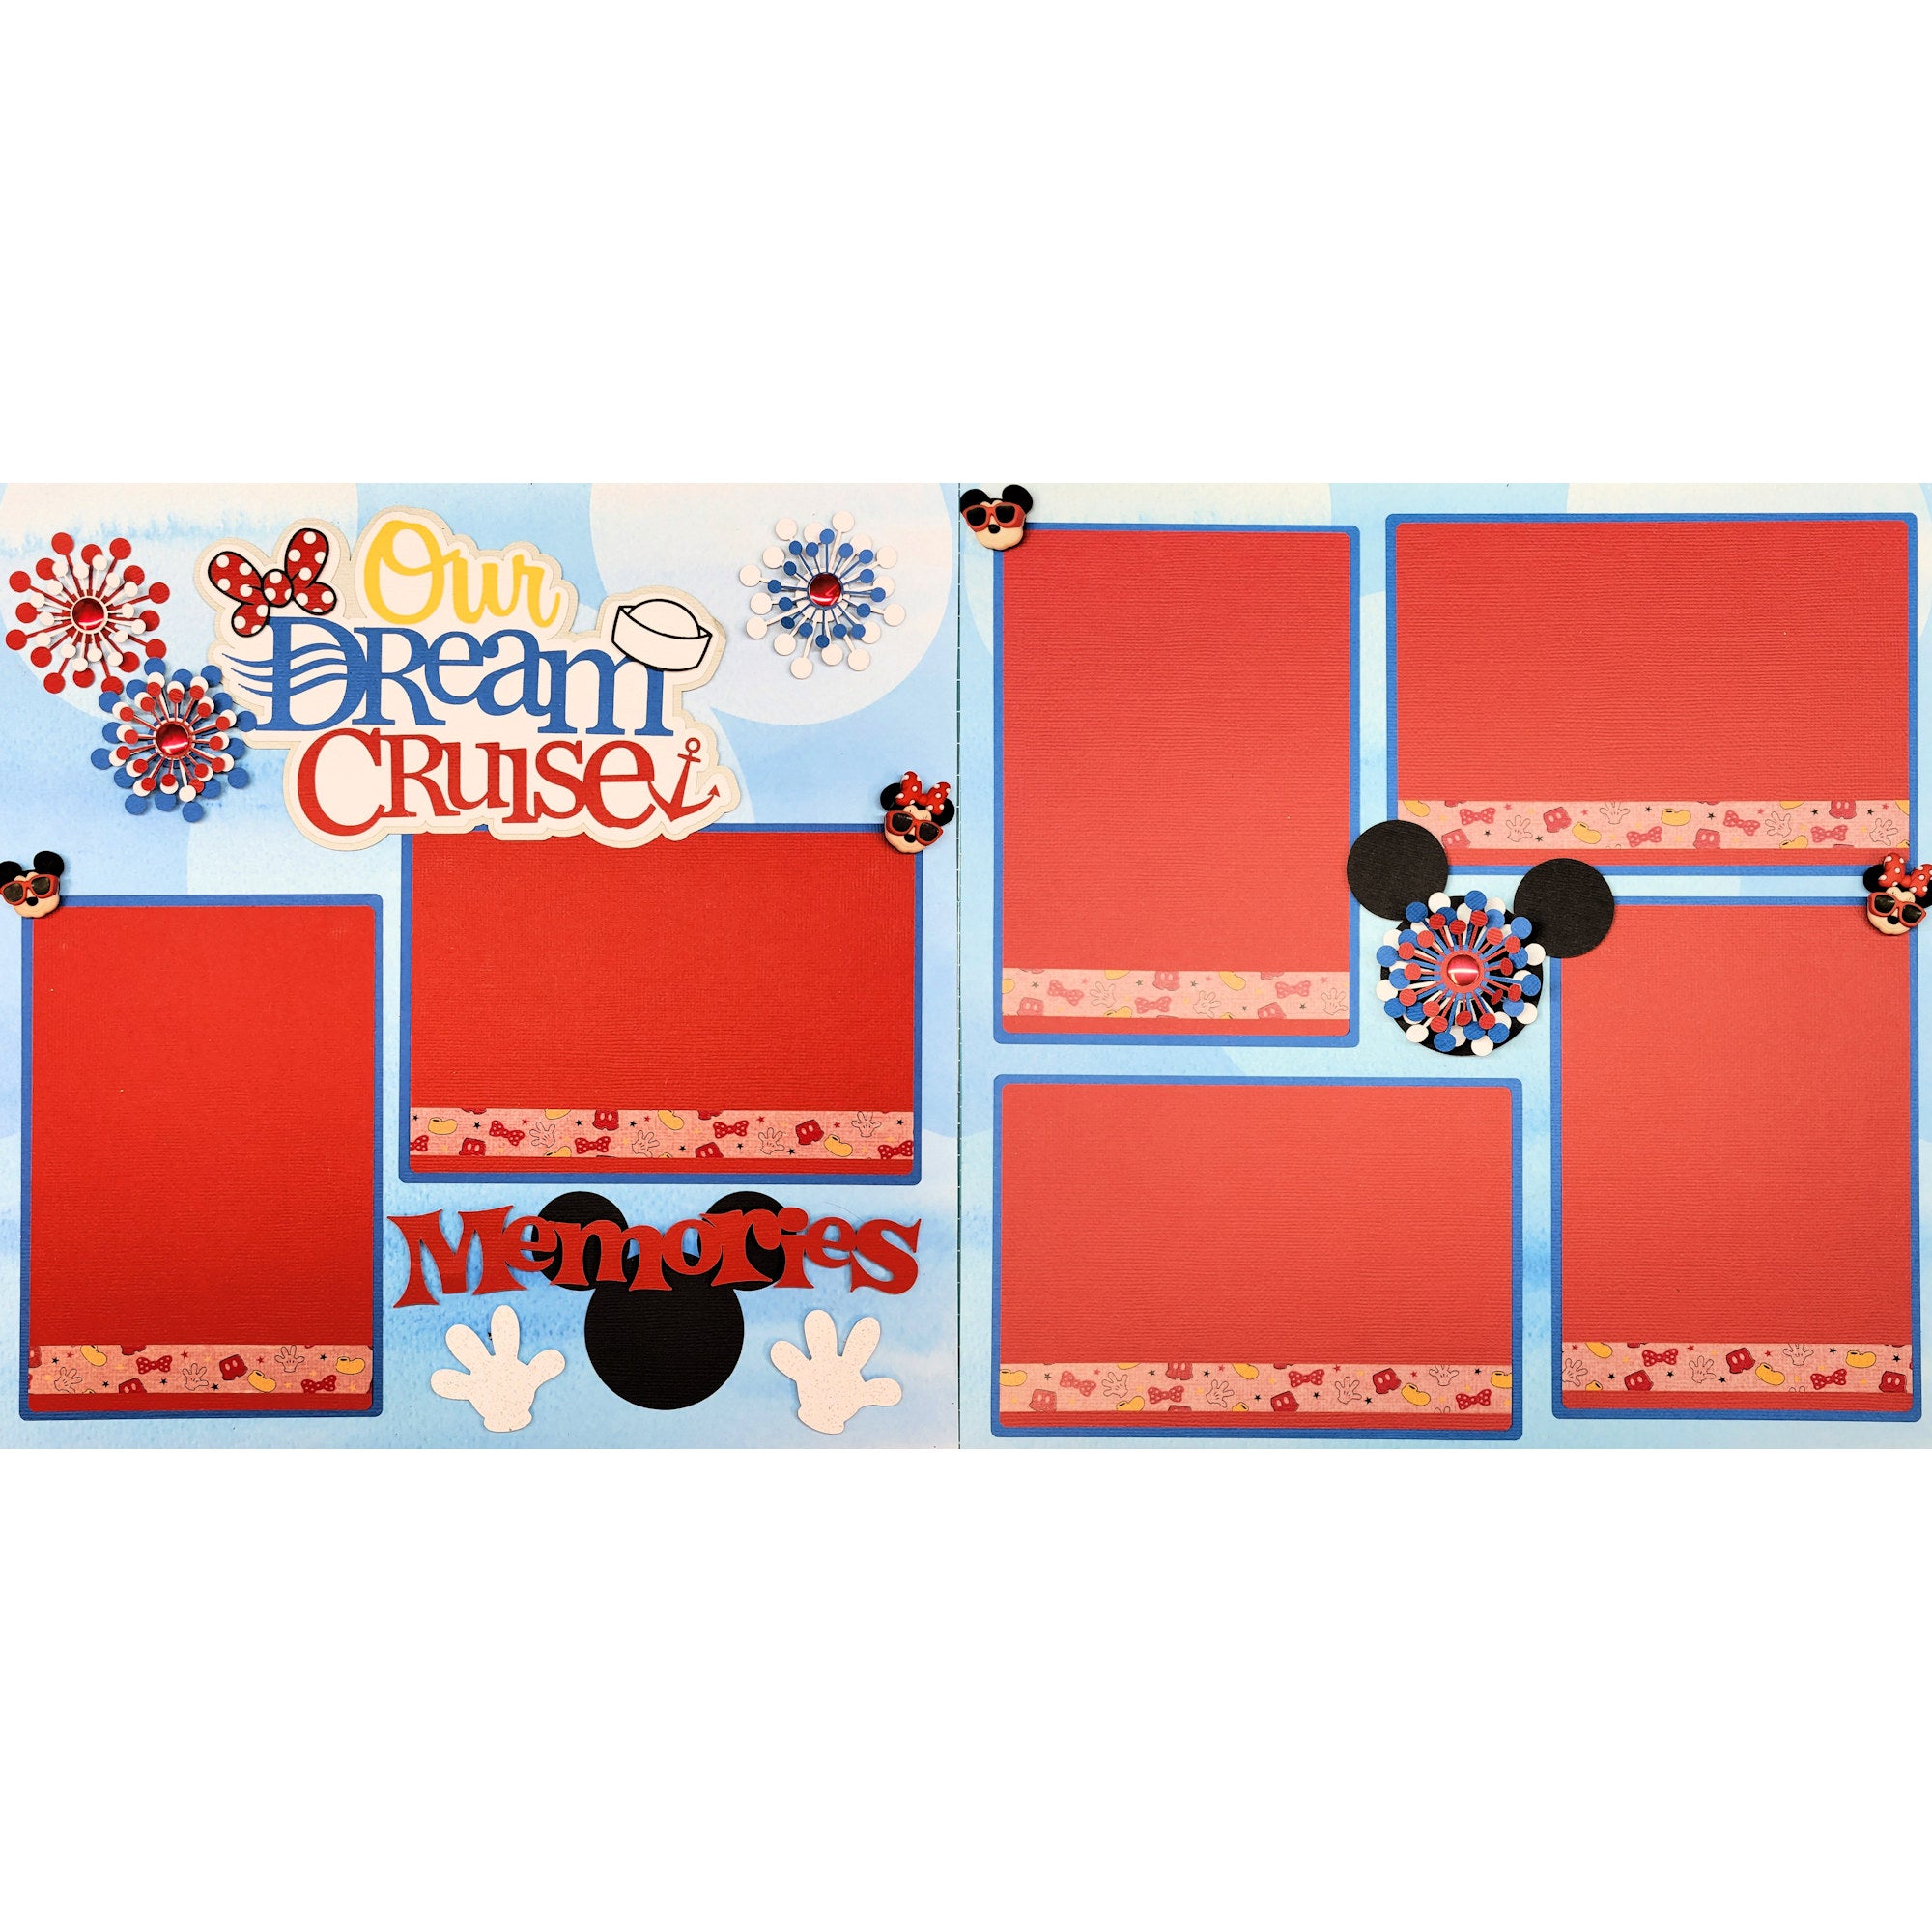 Disneyana Collection Our Dream Cruise (2) - 12 x 12 Pages, Fully-Assembled & Hand-Crafted 3D Scrapbook Premade by SSC Designs